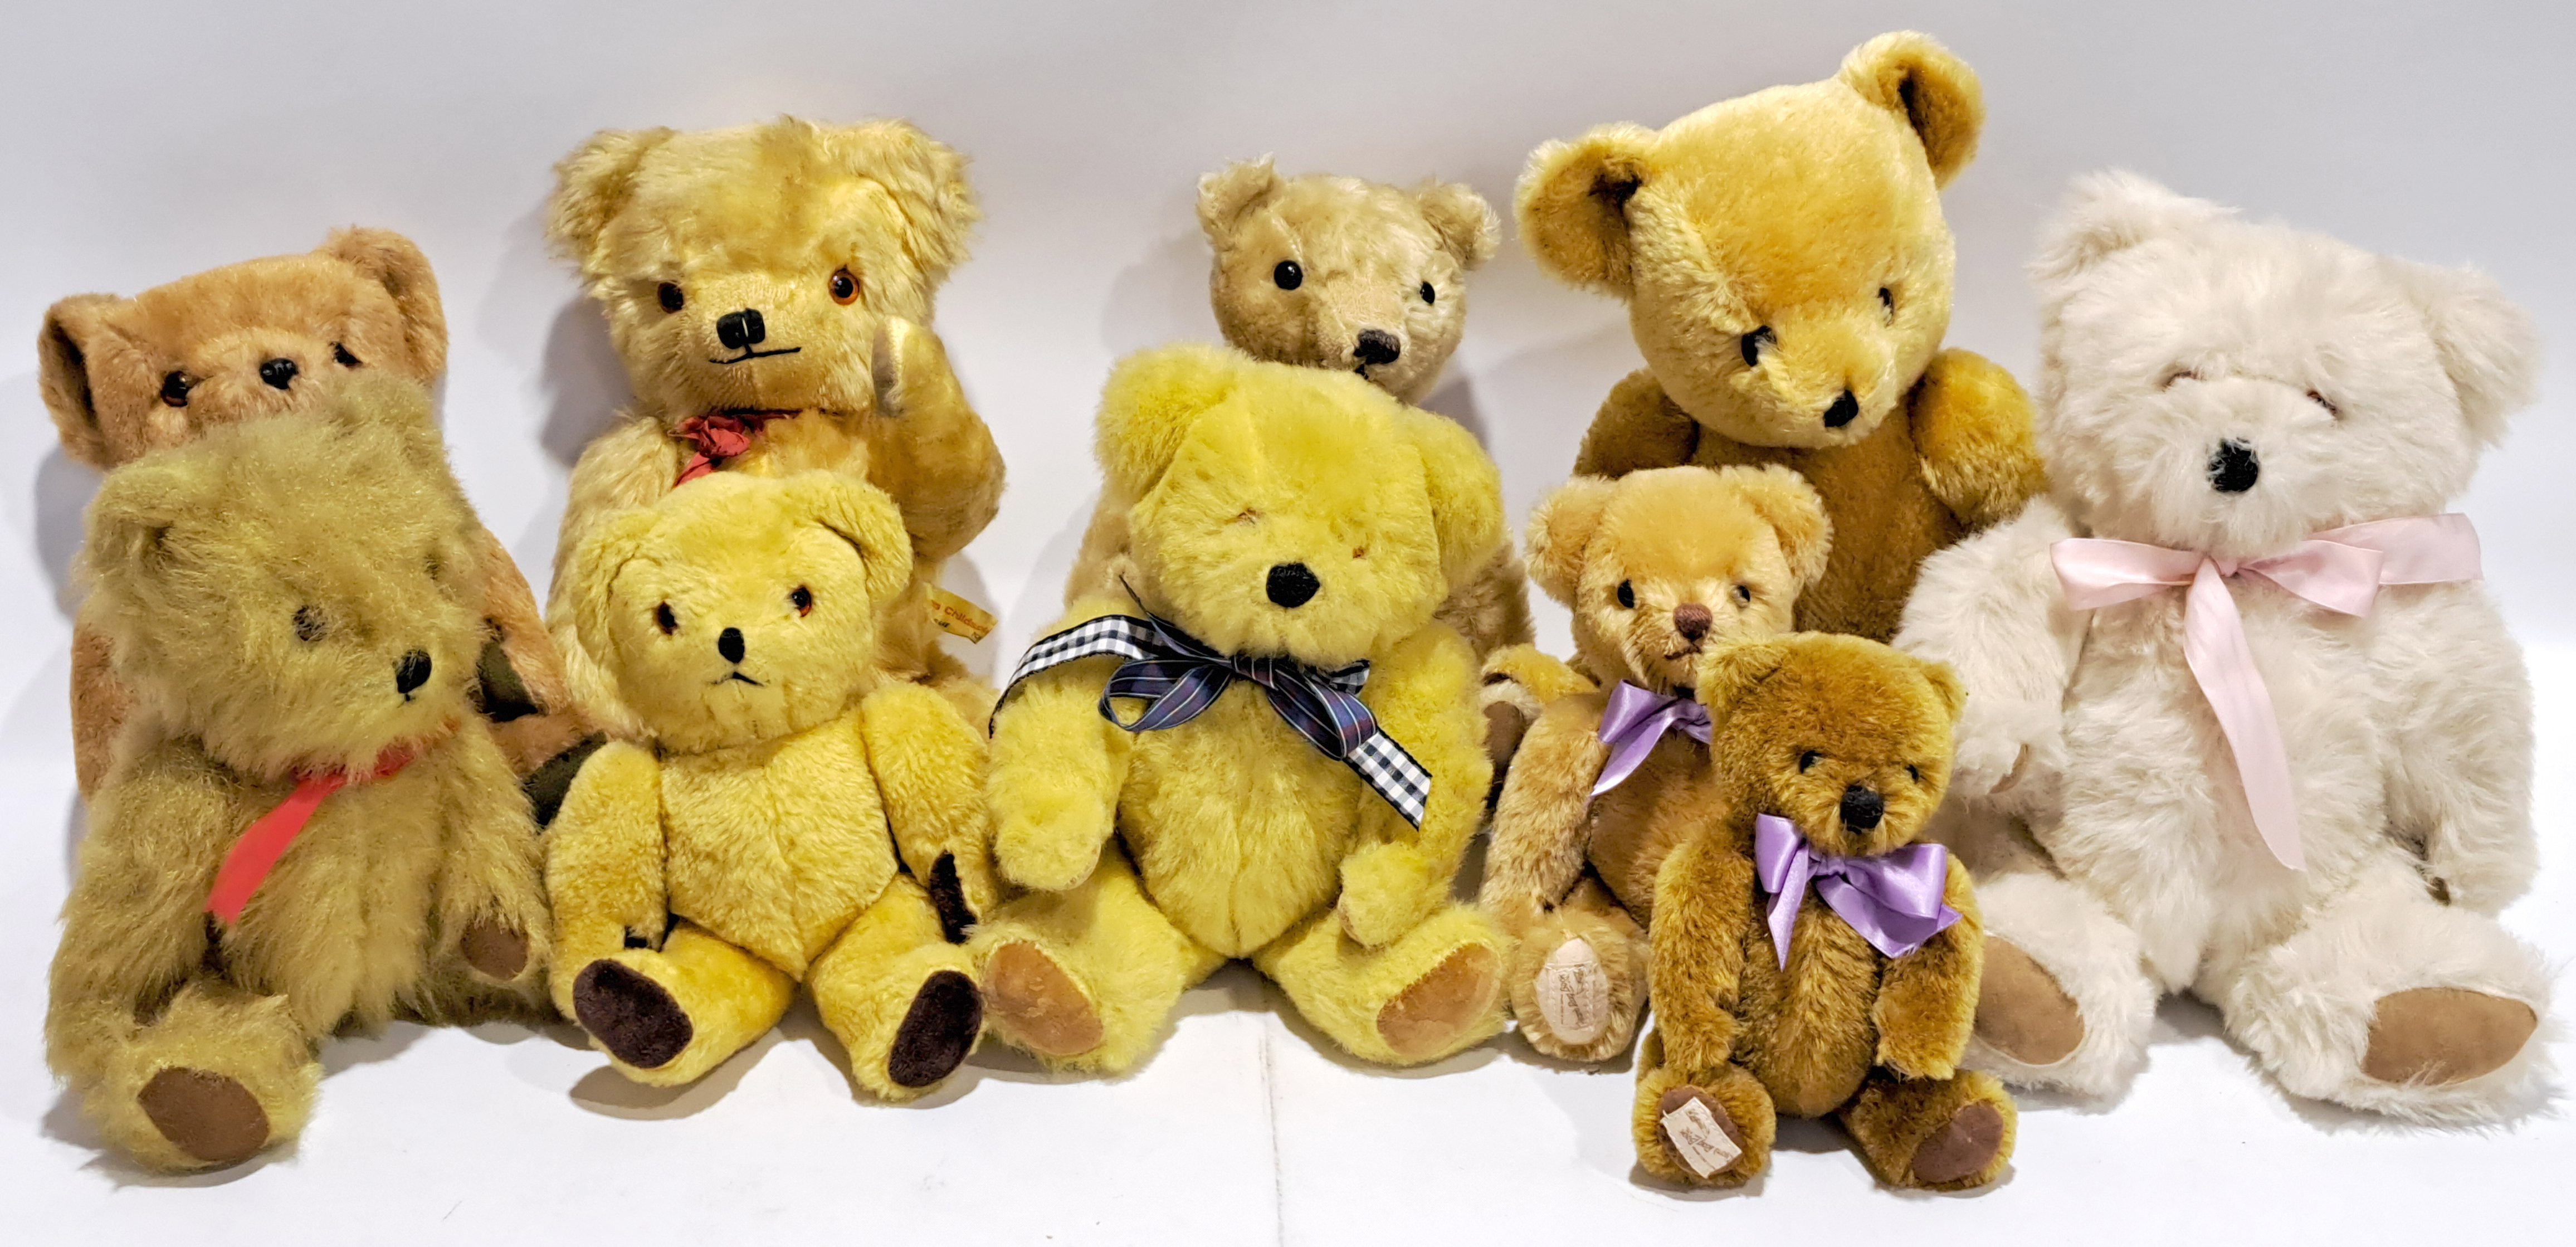 Dean's Rag Book collection of vintage teddy bears